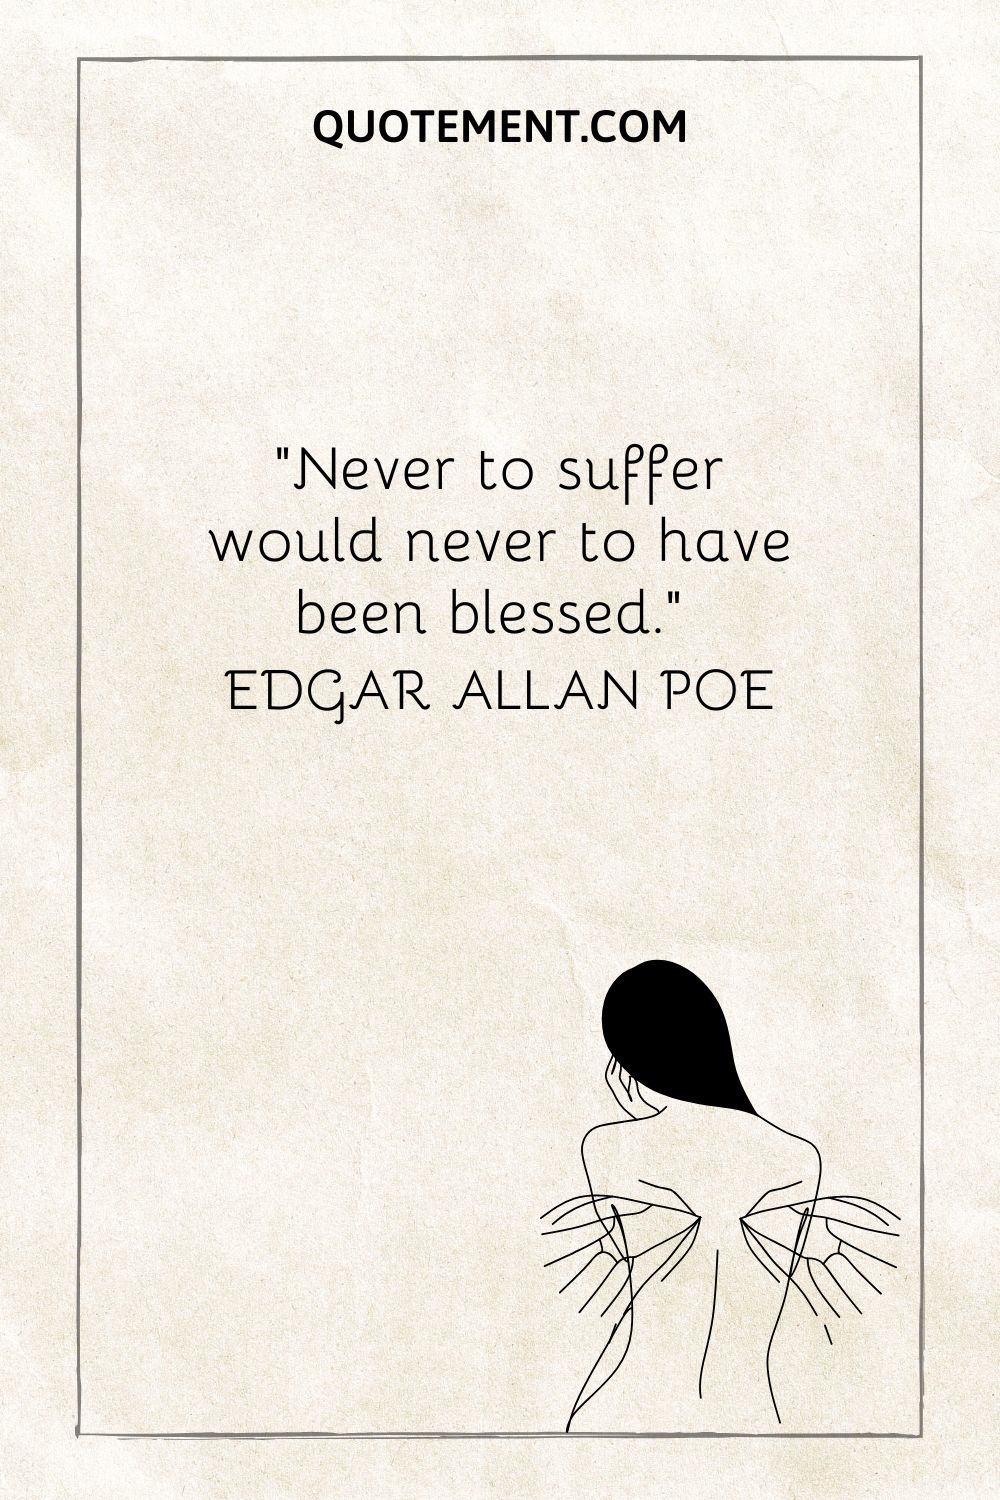 “Never to suffer would never to have been blessed.” — Edgar Allan Poe